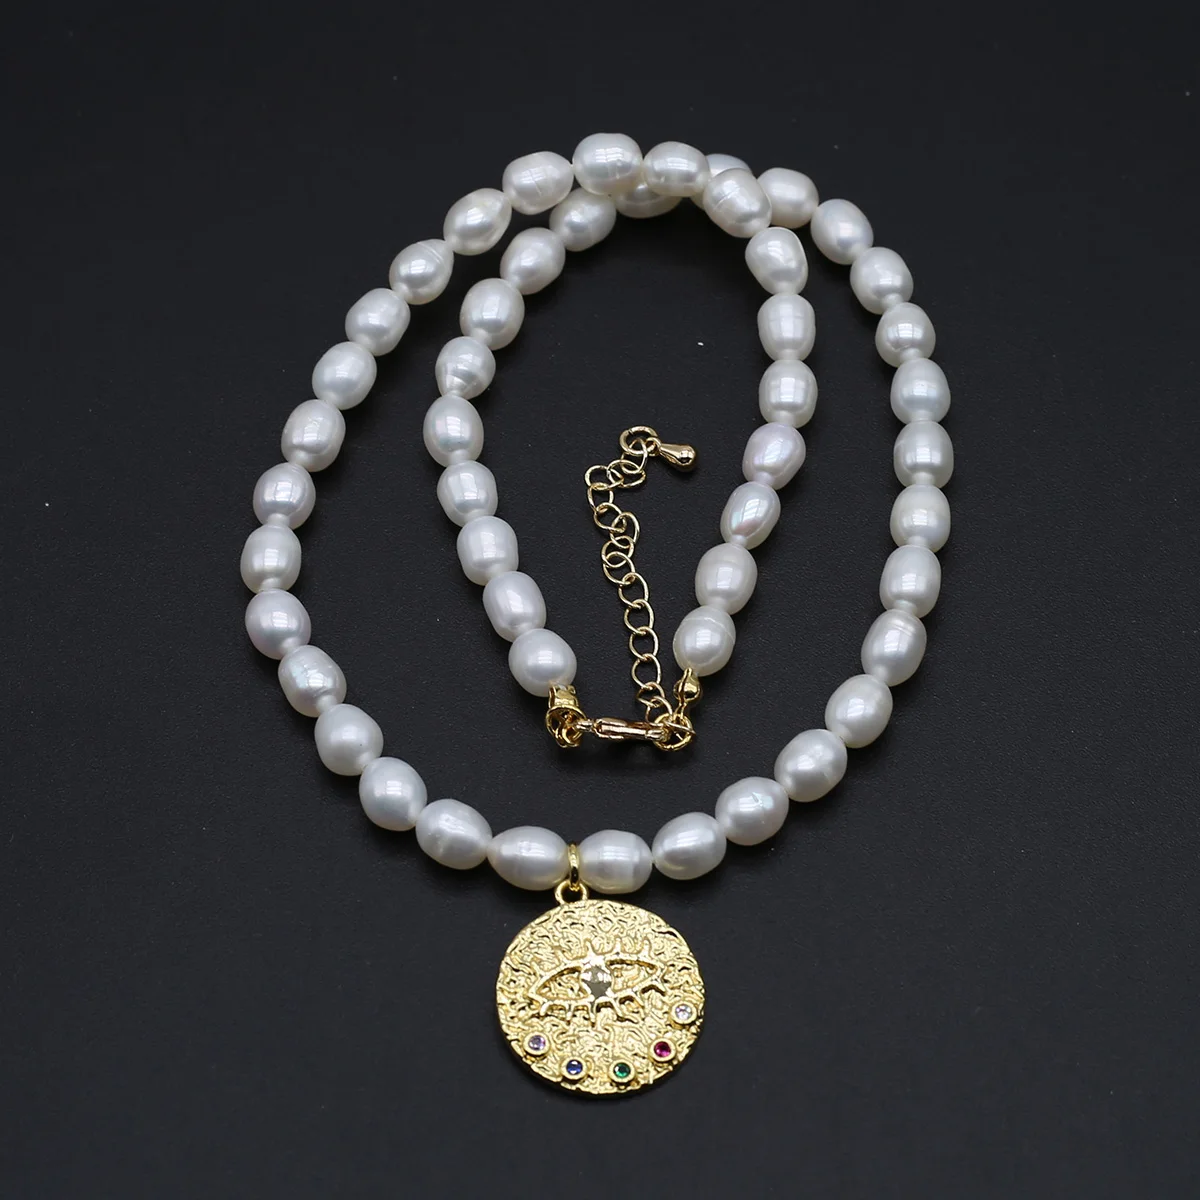 

Natural Freshwater White Pearl Beads Necklace Gold Round Carved Pendant 20X20mm Exquisite Charm Party Jewelry Gift 6-7mm